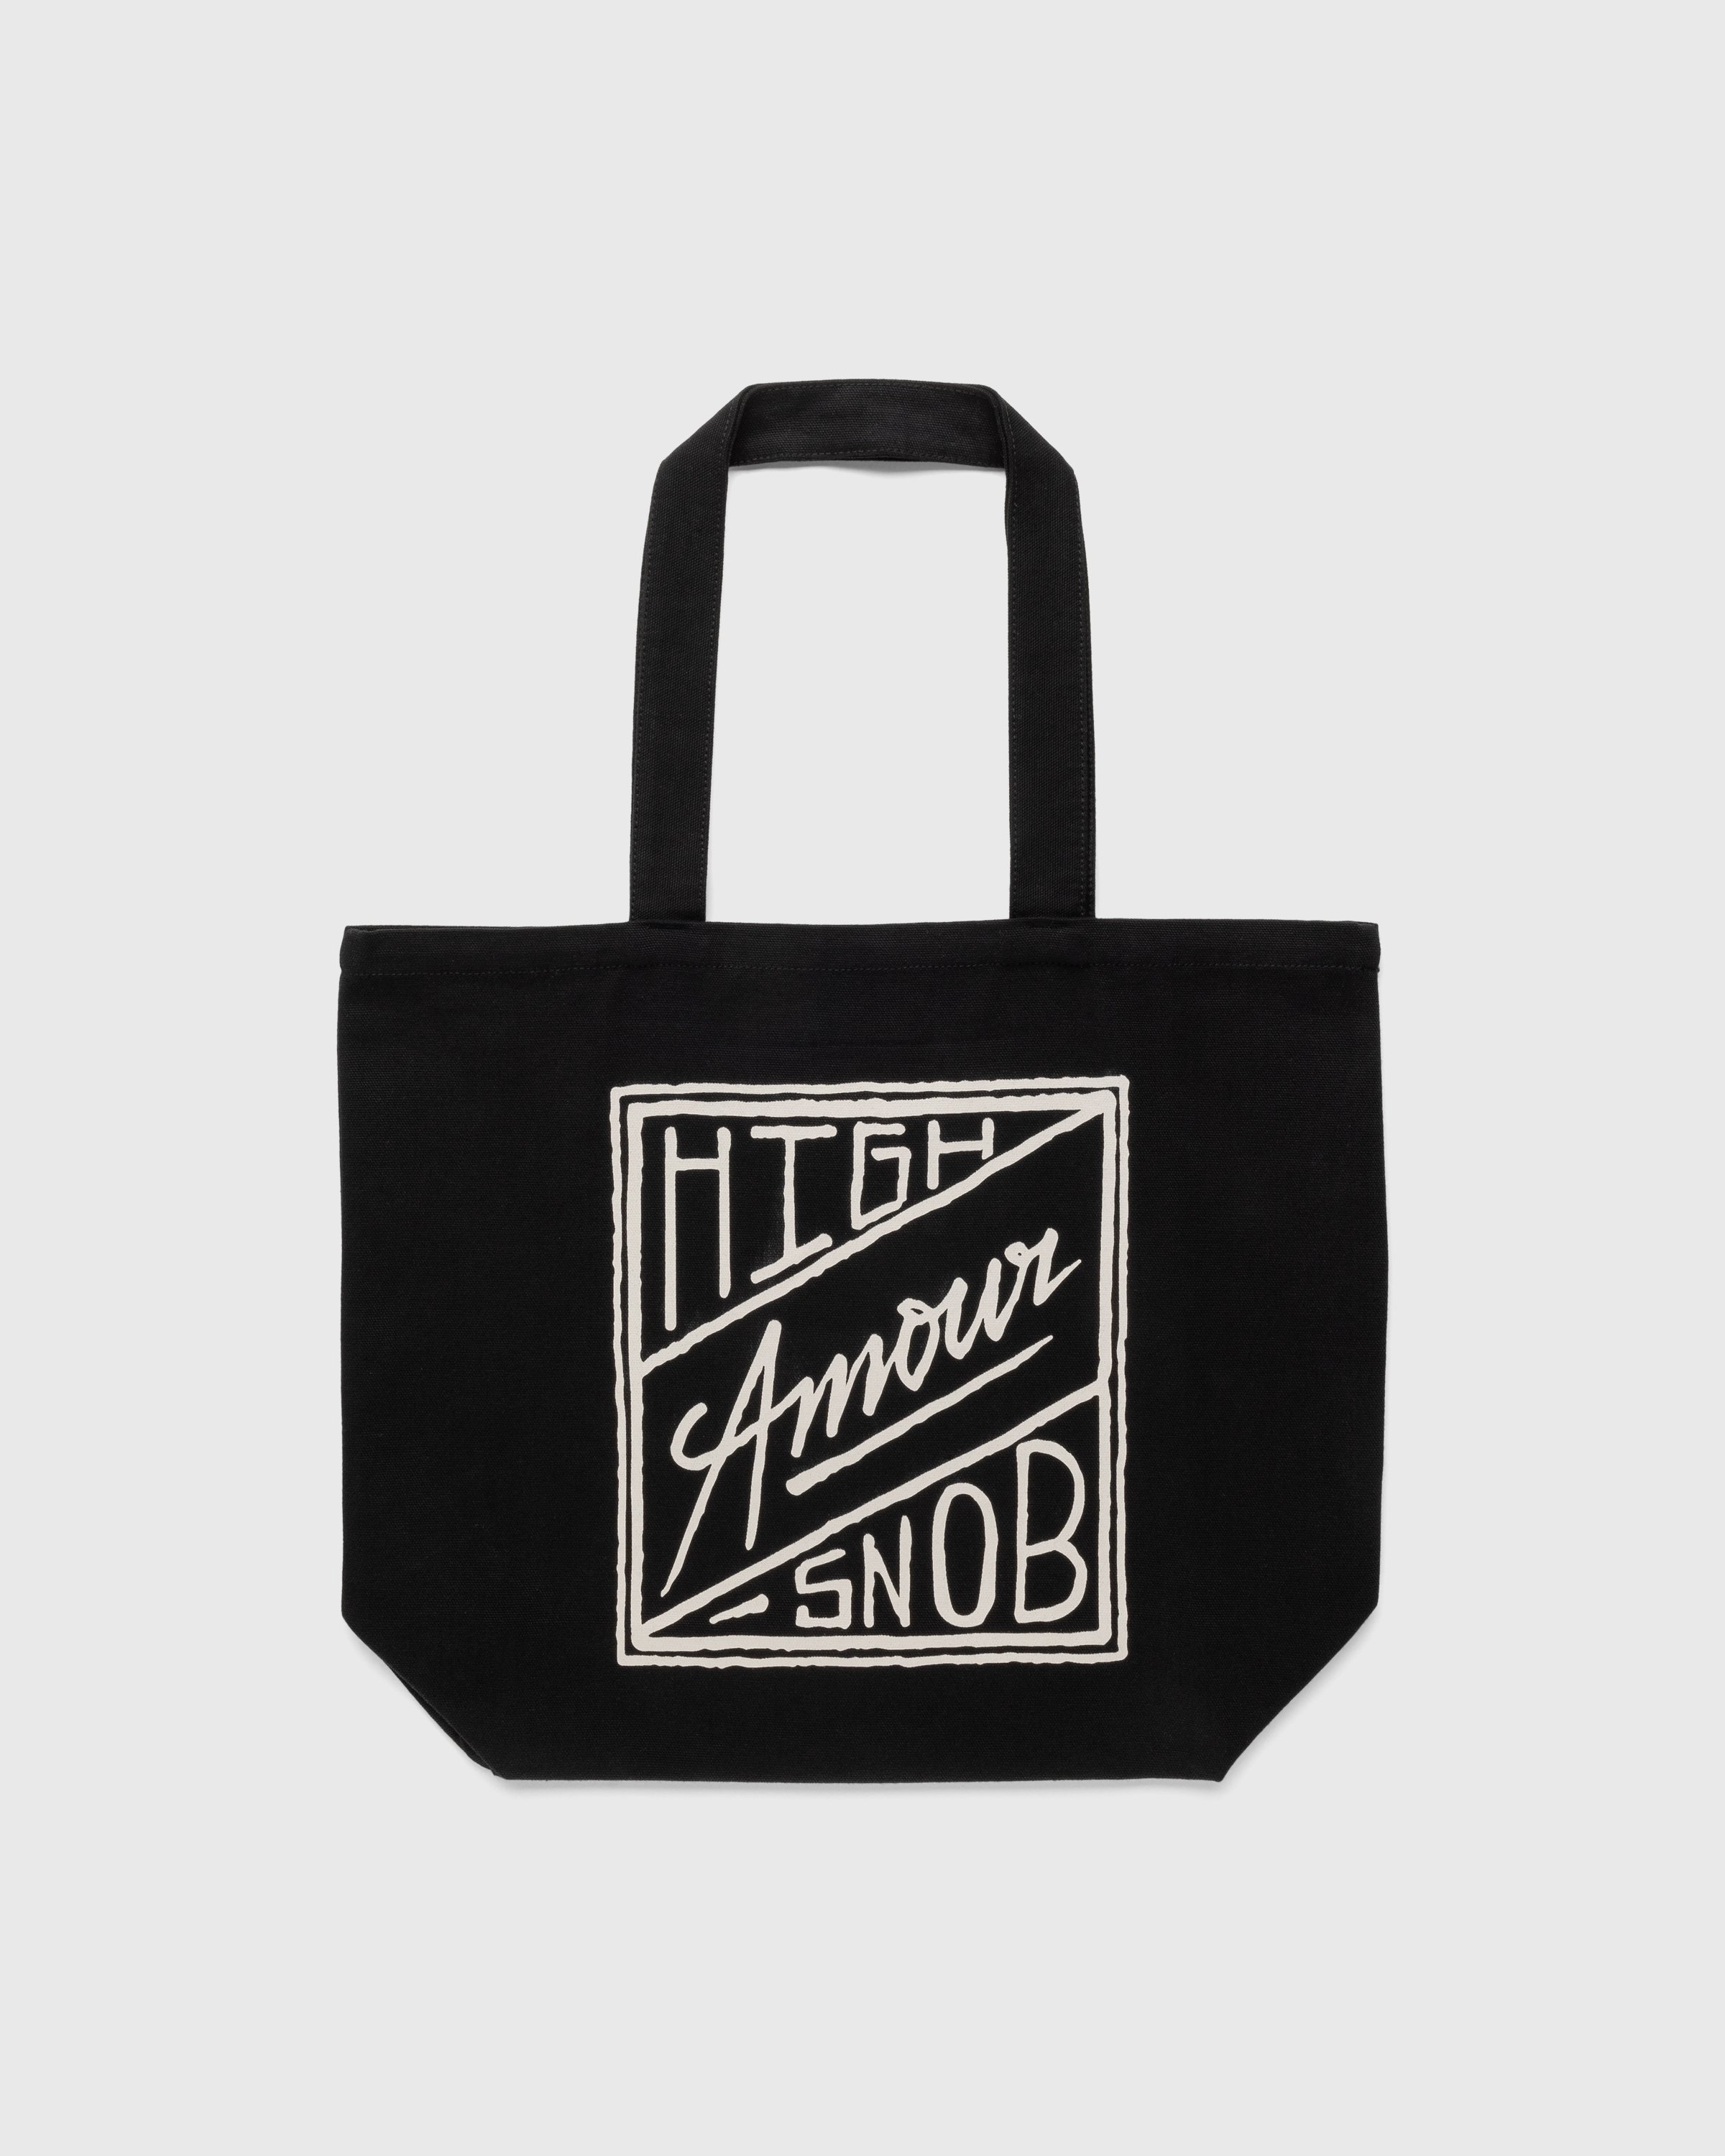 Hotel Amour x Highsnobiety - Not In Paris 4 Tote Bag Black - Accessories - Black - Image 1